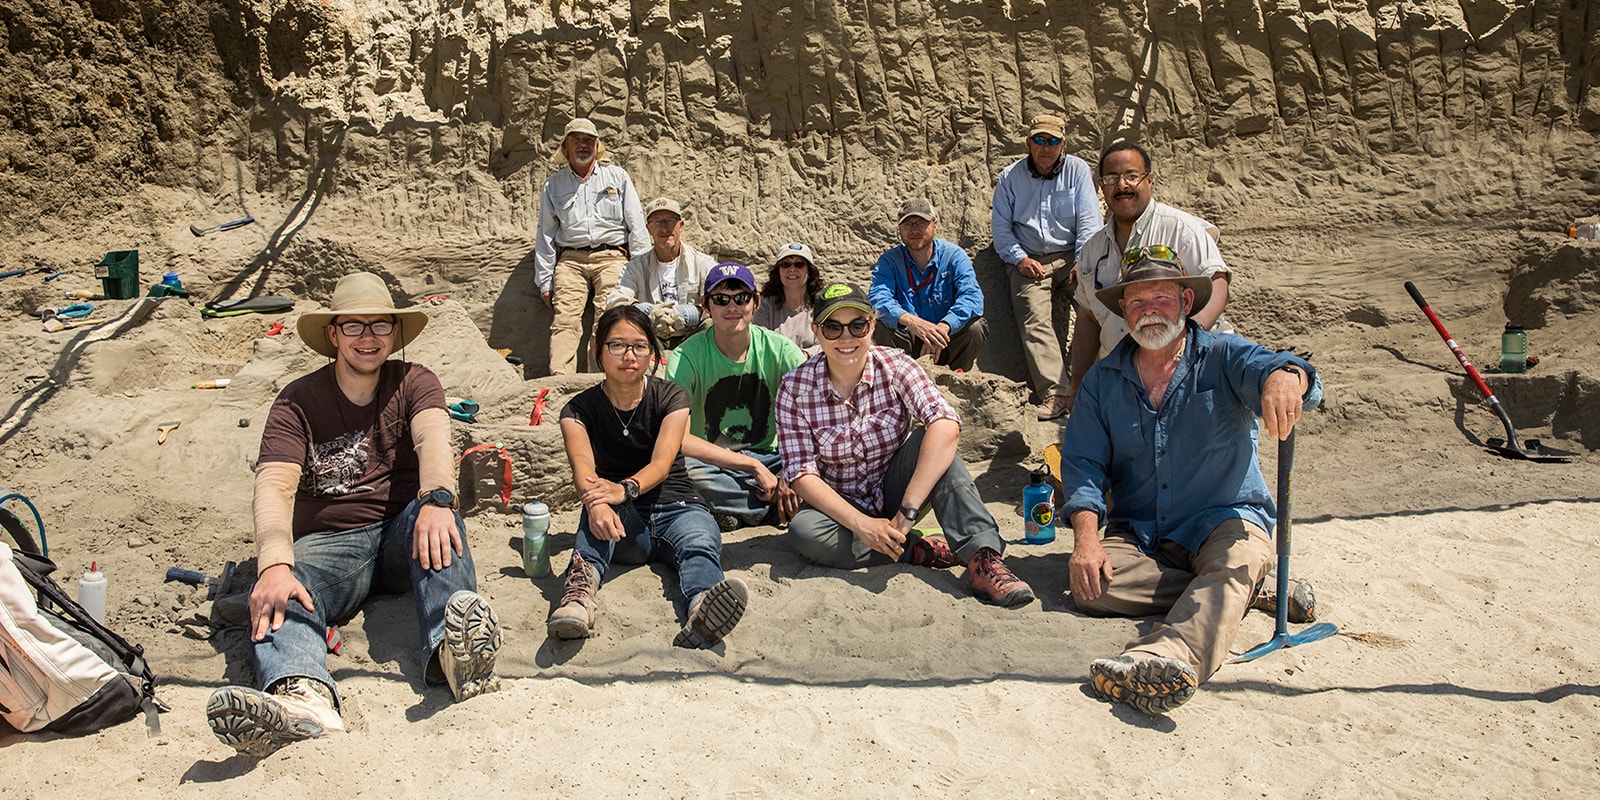 A group of eleven people posing for a group photo at a t.rex dig site